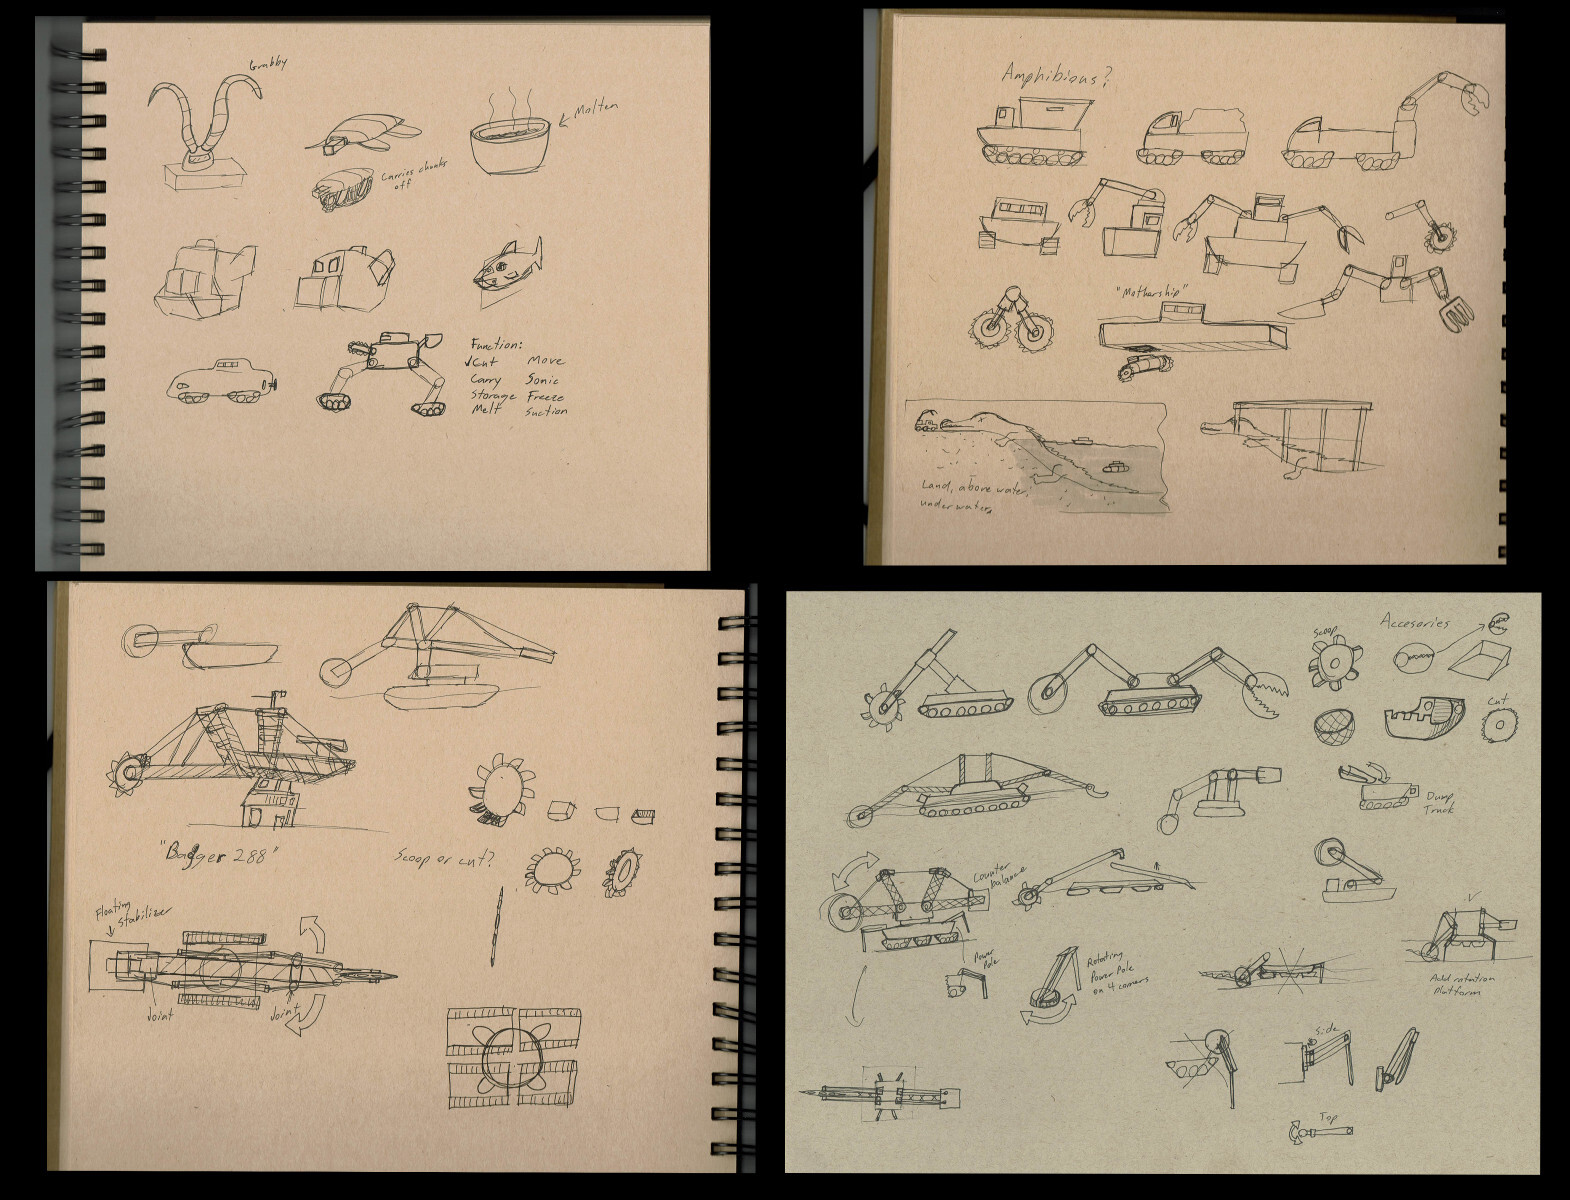 Some early brainstorming and iteration sketches